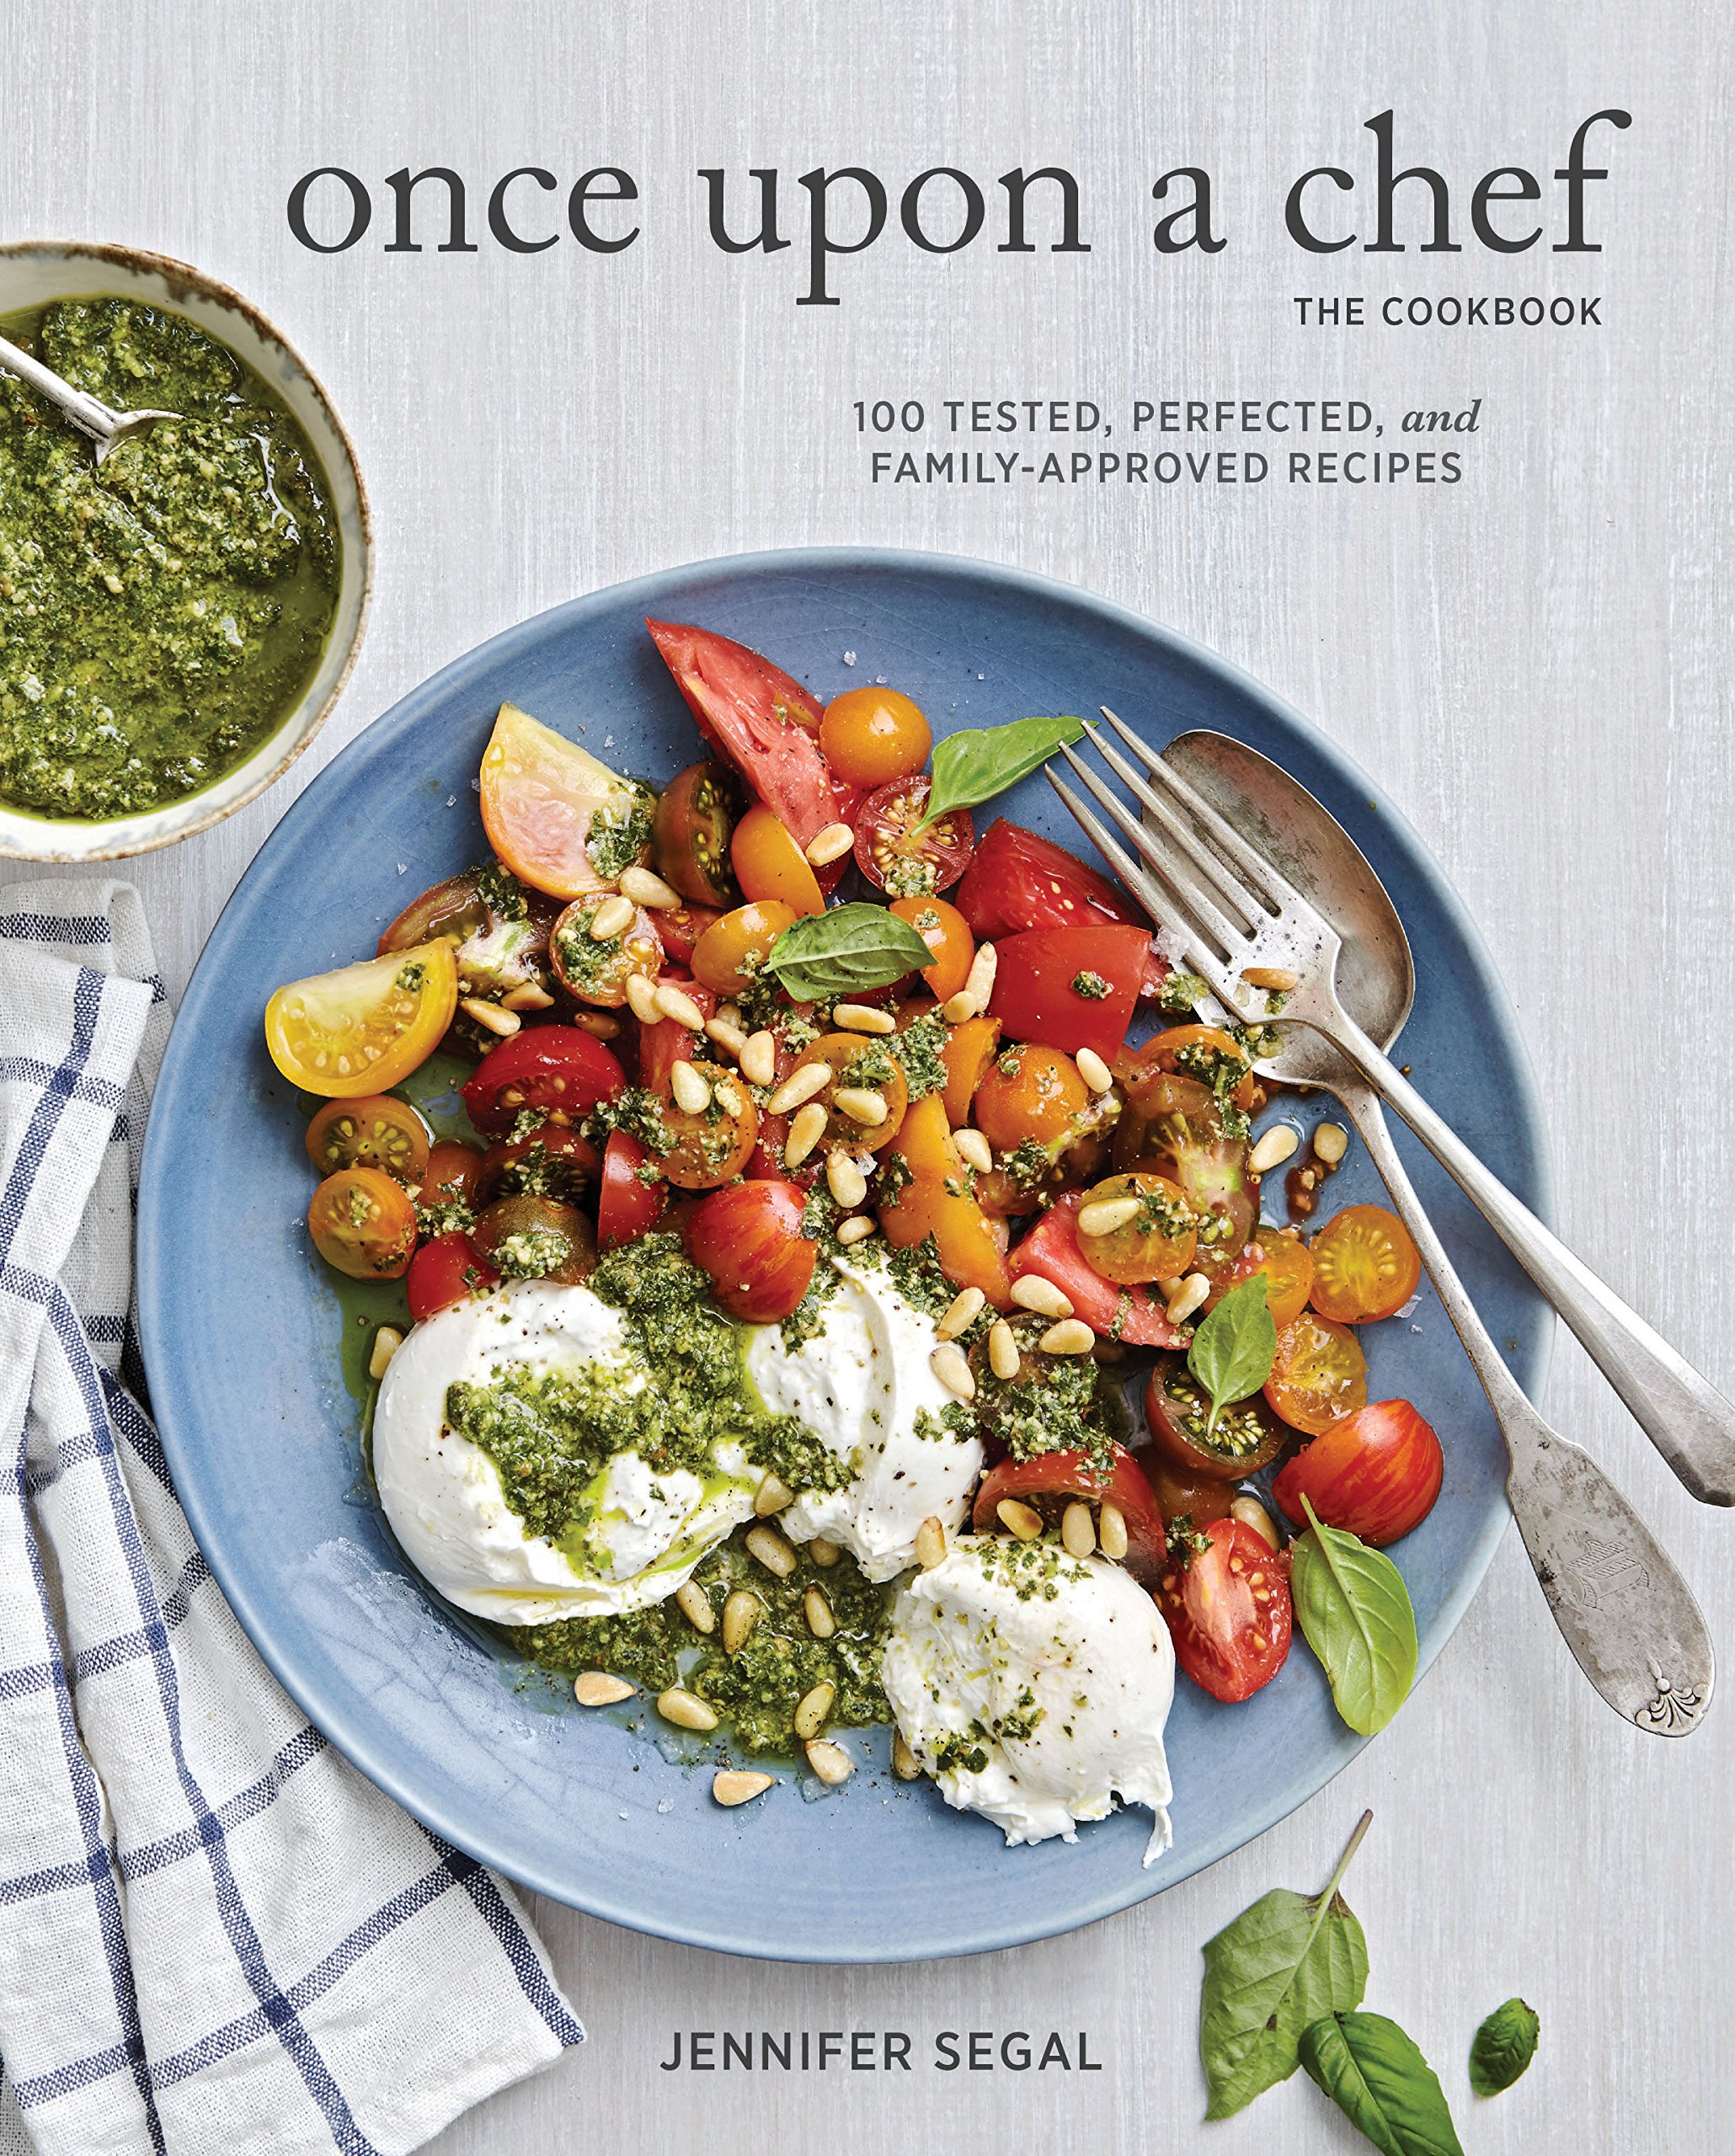 Once Upon a Chef, the Cookbook: 100 Tested, Perfected, and Family-Approved Recipes (eBook) by Jennifer Segal $2.99